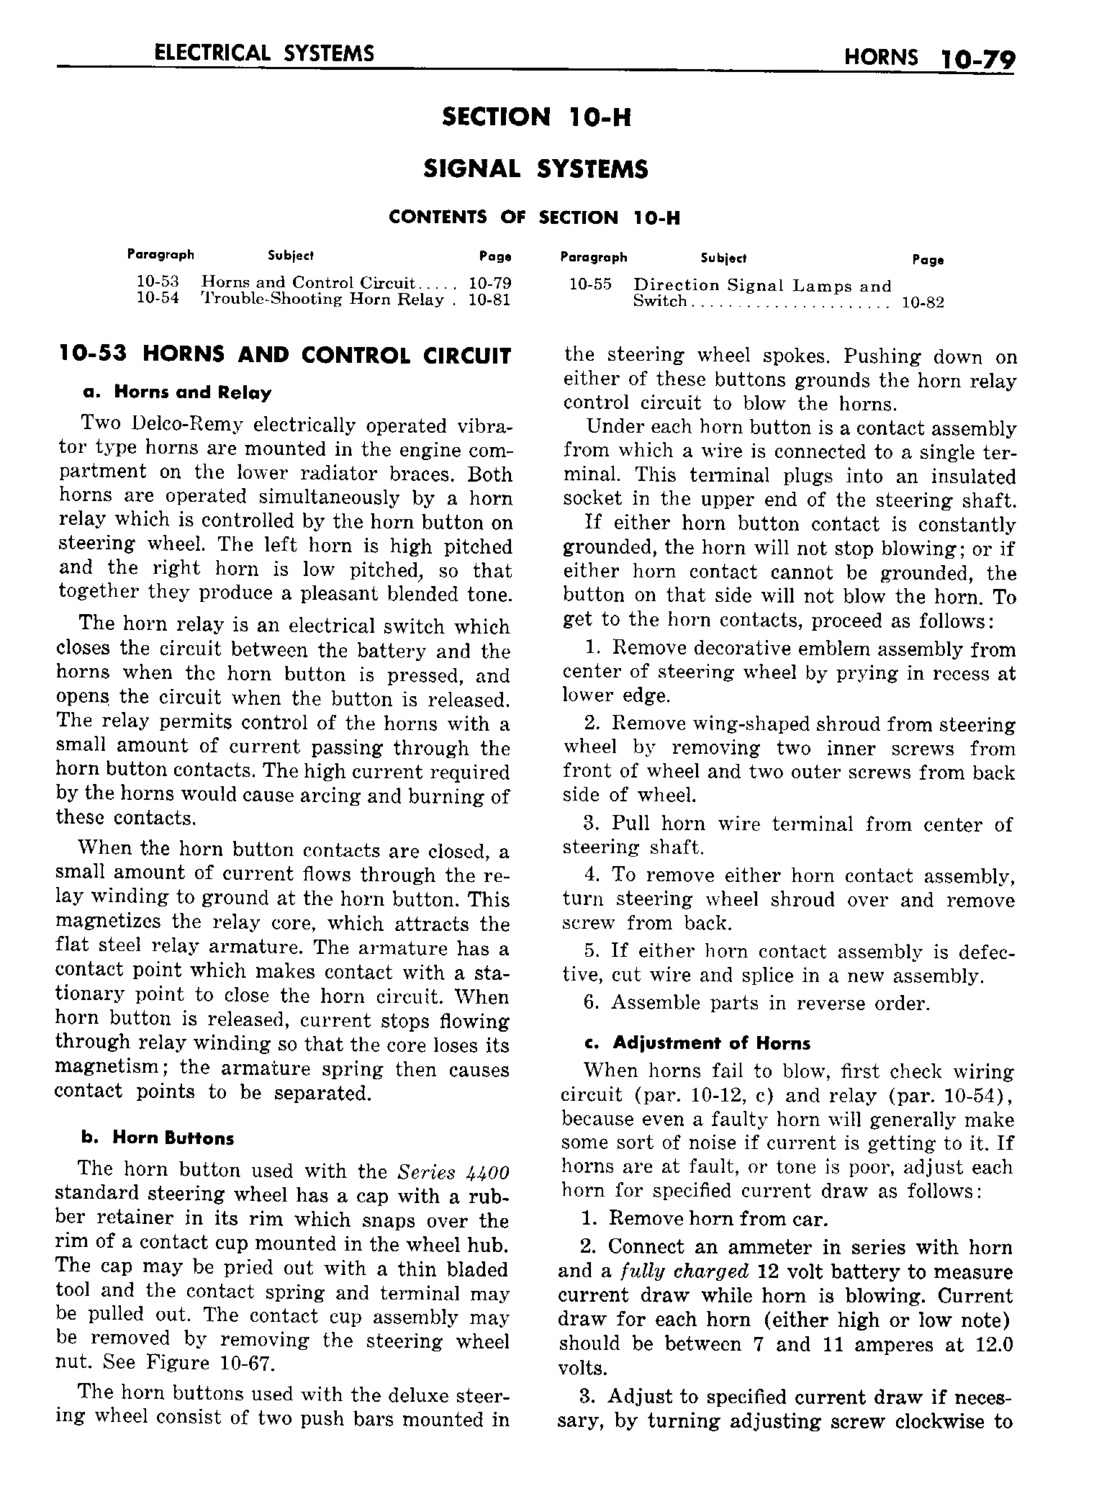 n_11 1960 Buick Shop Manual - Electrical Systems-079-079.jpg